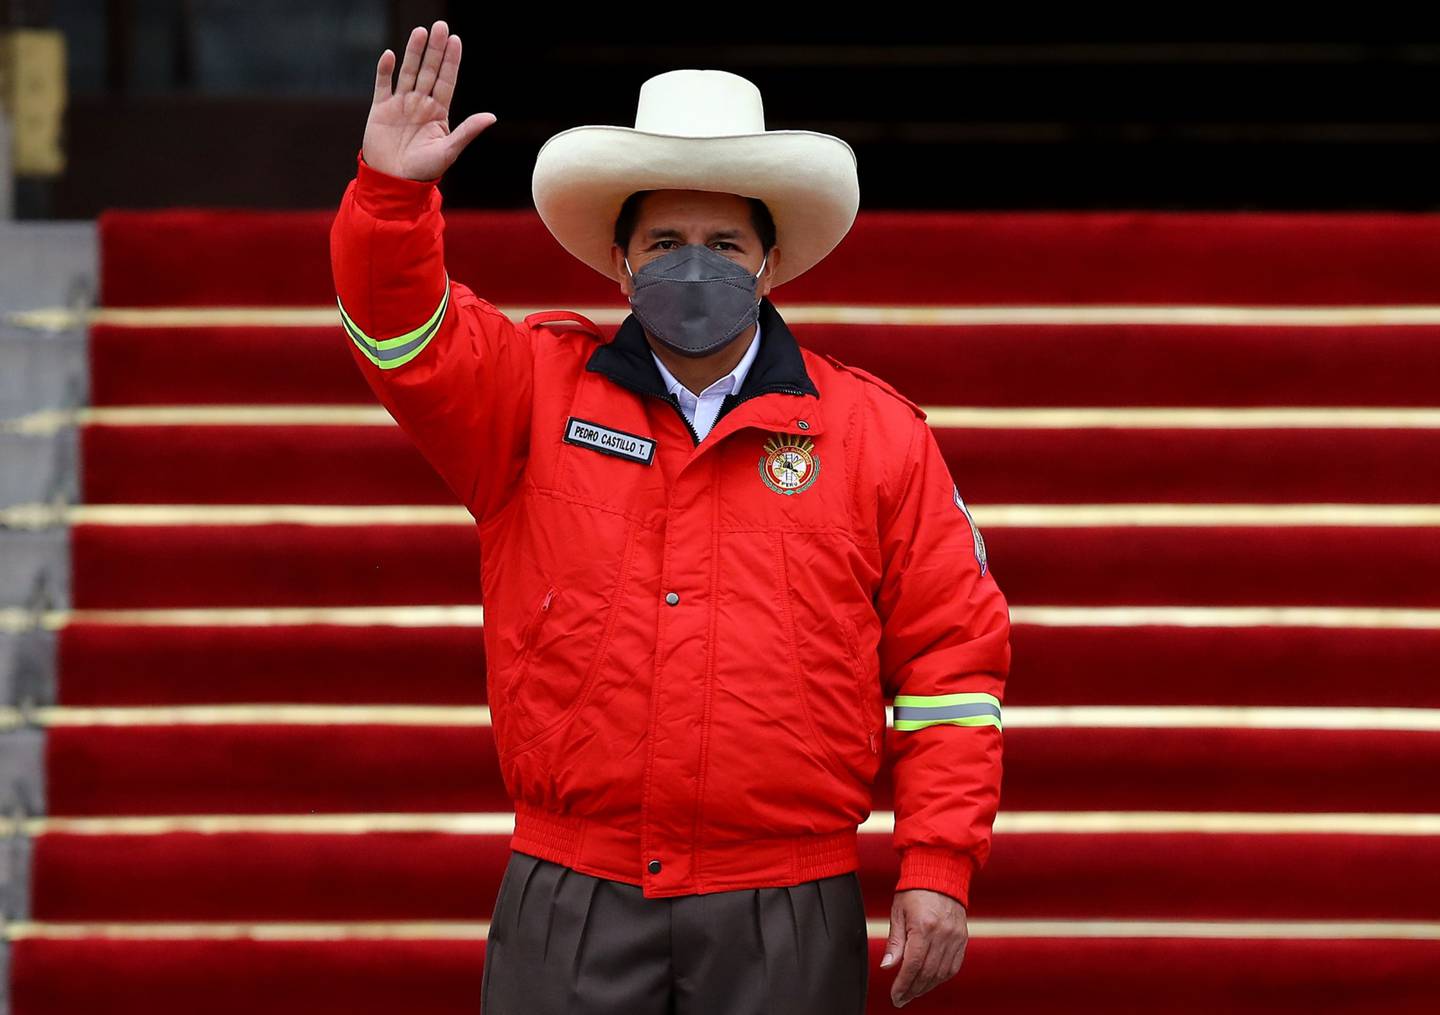 LIMA, PERU - DECEMBER 05: Peruvian President Pedro Castillo (C) wears a firefighter jacket and salutes during an event to deliver firetrucks to Volunteer firefighters of Peru on December 5, 2021 in Lima, Peru. After only four months in power, National Congress will vote this week on whether to start the formal impeachment process to Castillo. The Left-wing President will also be questioned by prosecutors on December 14th over promotions for military officers. (Photo by Leonardo Fernandez/Getty Images)dfd